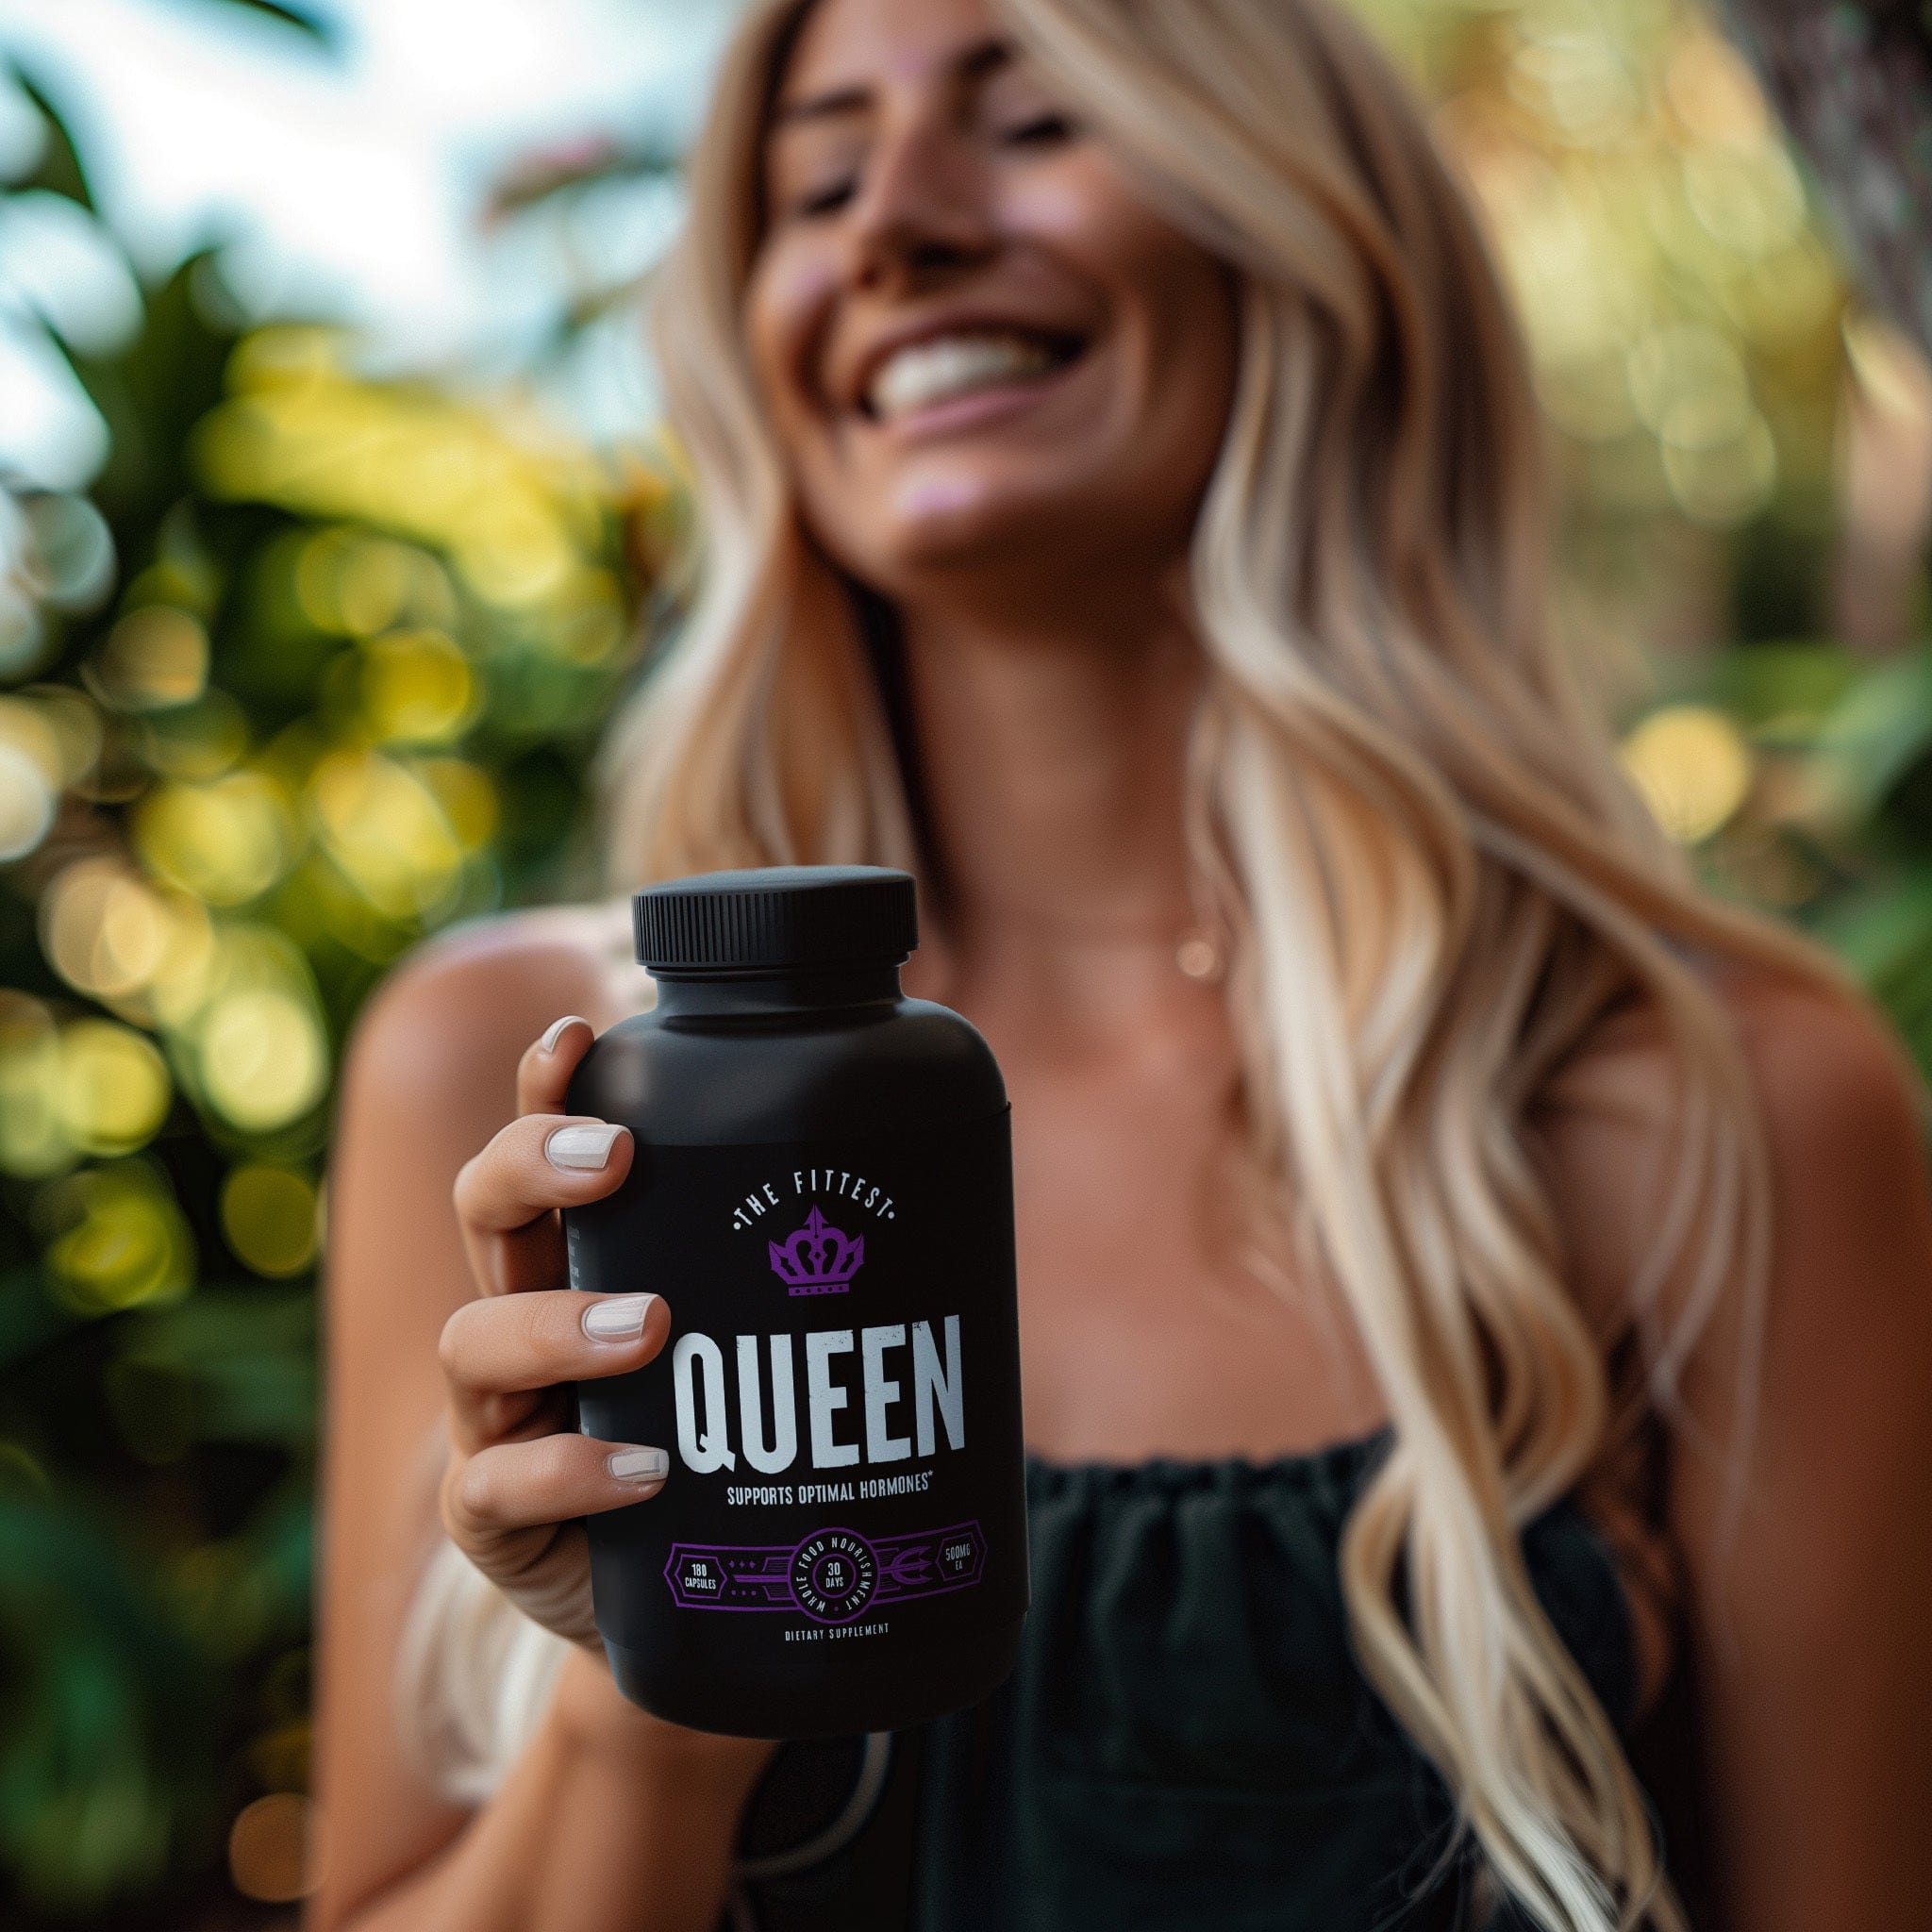 A fit woman holding a bottle of Queen out for the camera